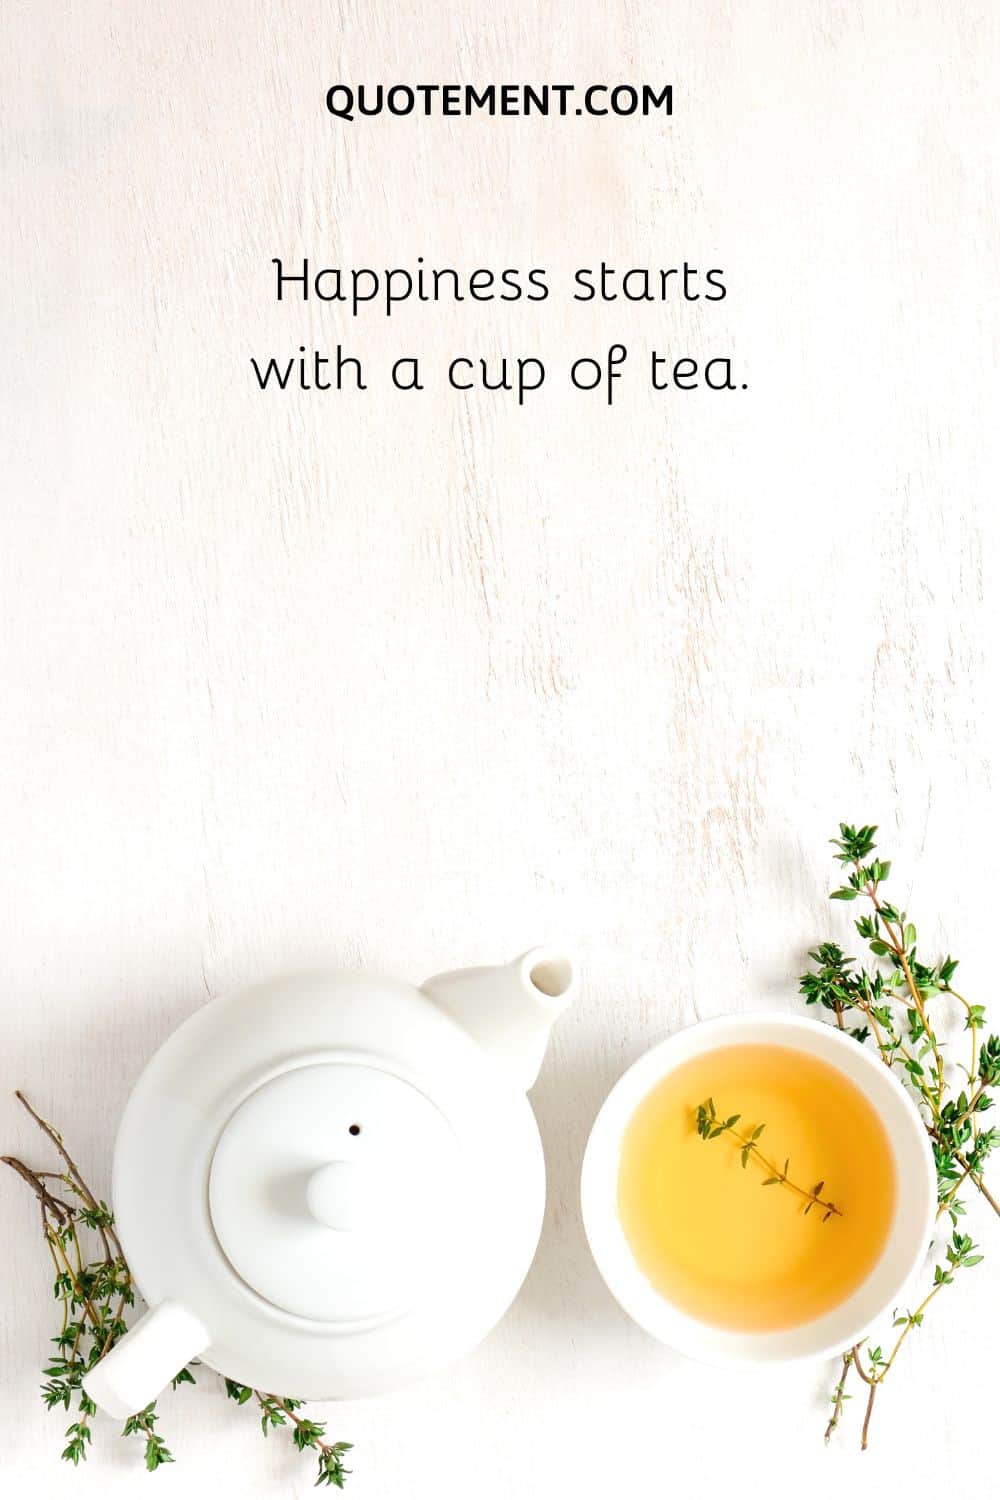 Happiness starts with a cup of tea.